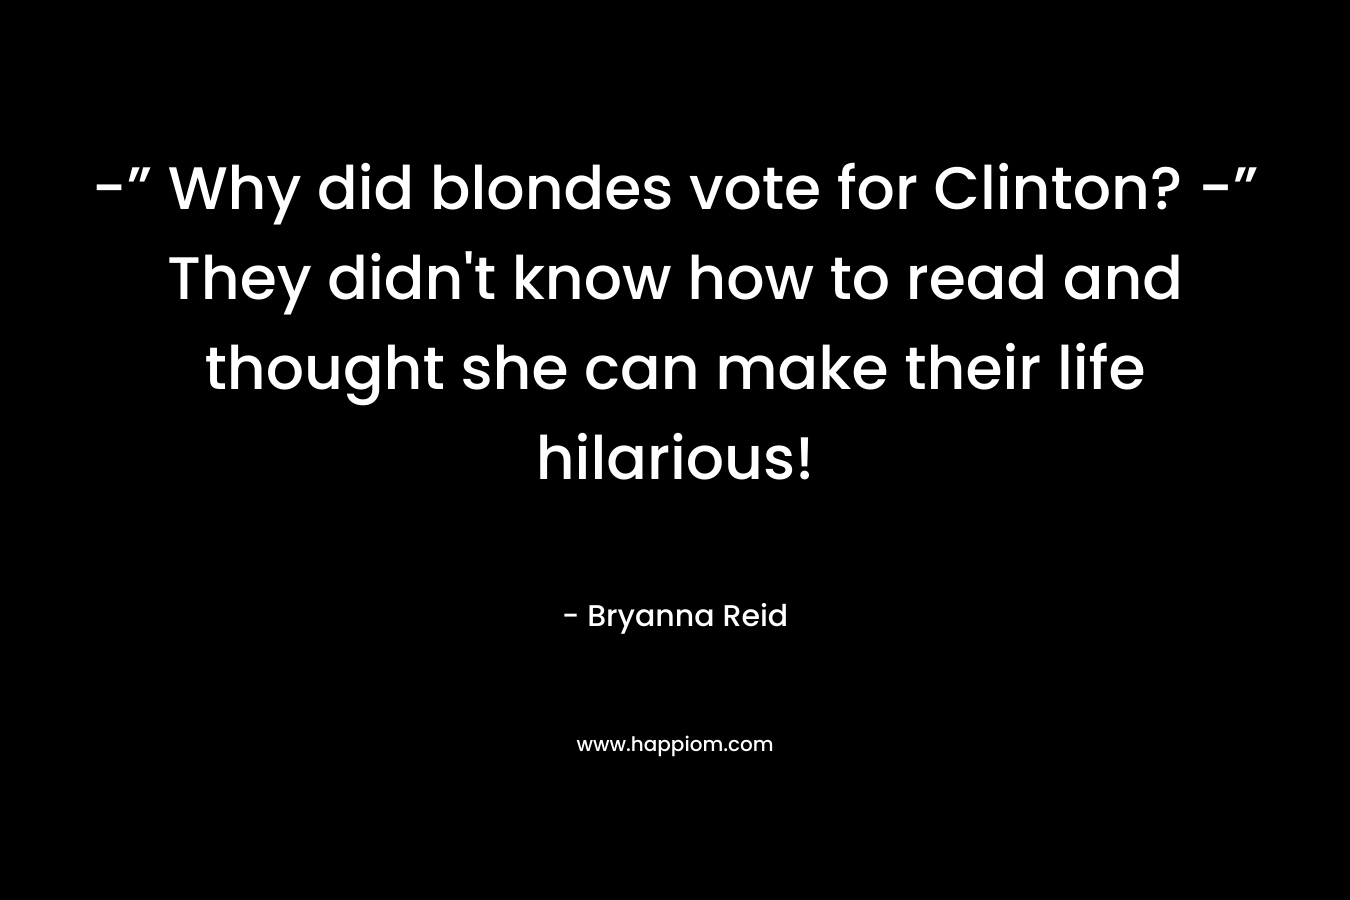 -” Why did blondes vote for Clinton? -” They didn’t know how to read and thought she can make their life hilarious! – Bryanna Reid